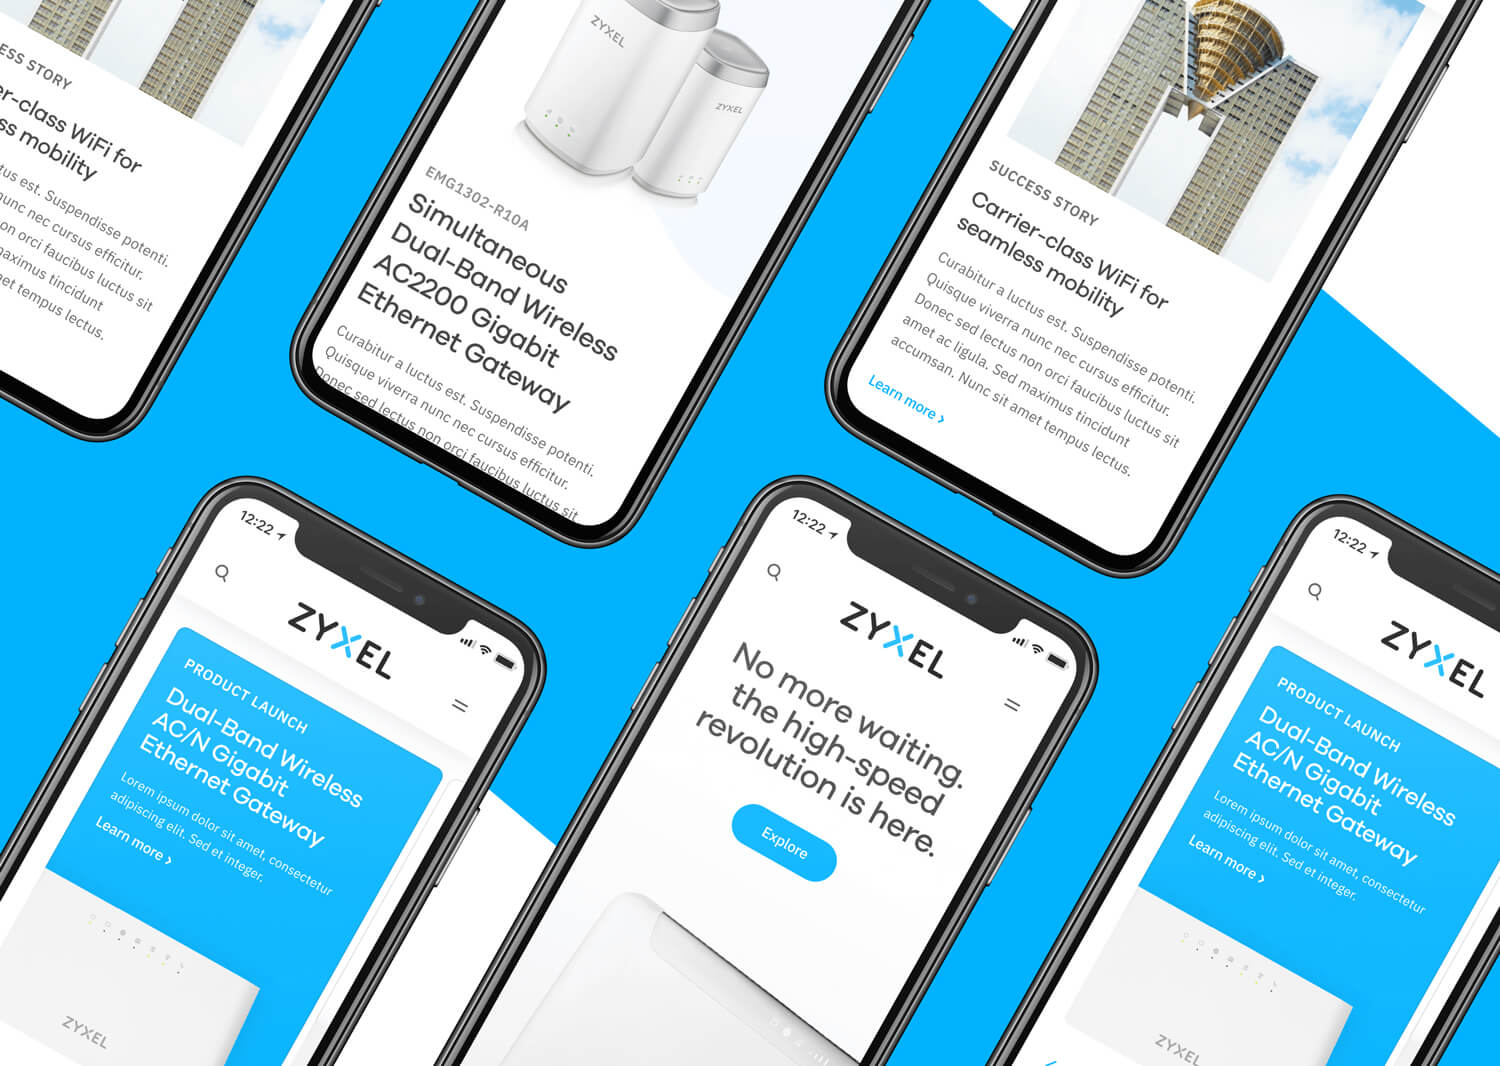 A flexible design system for Zyxel